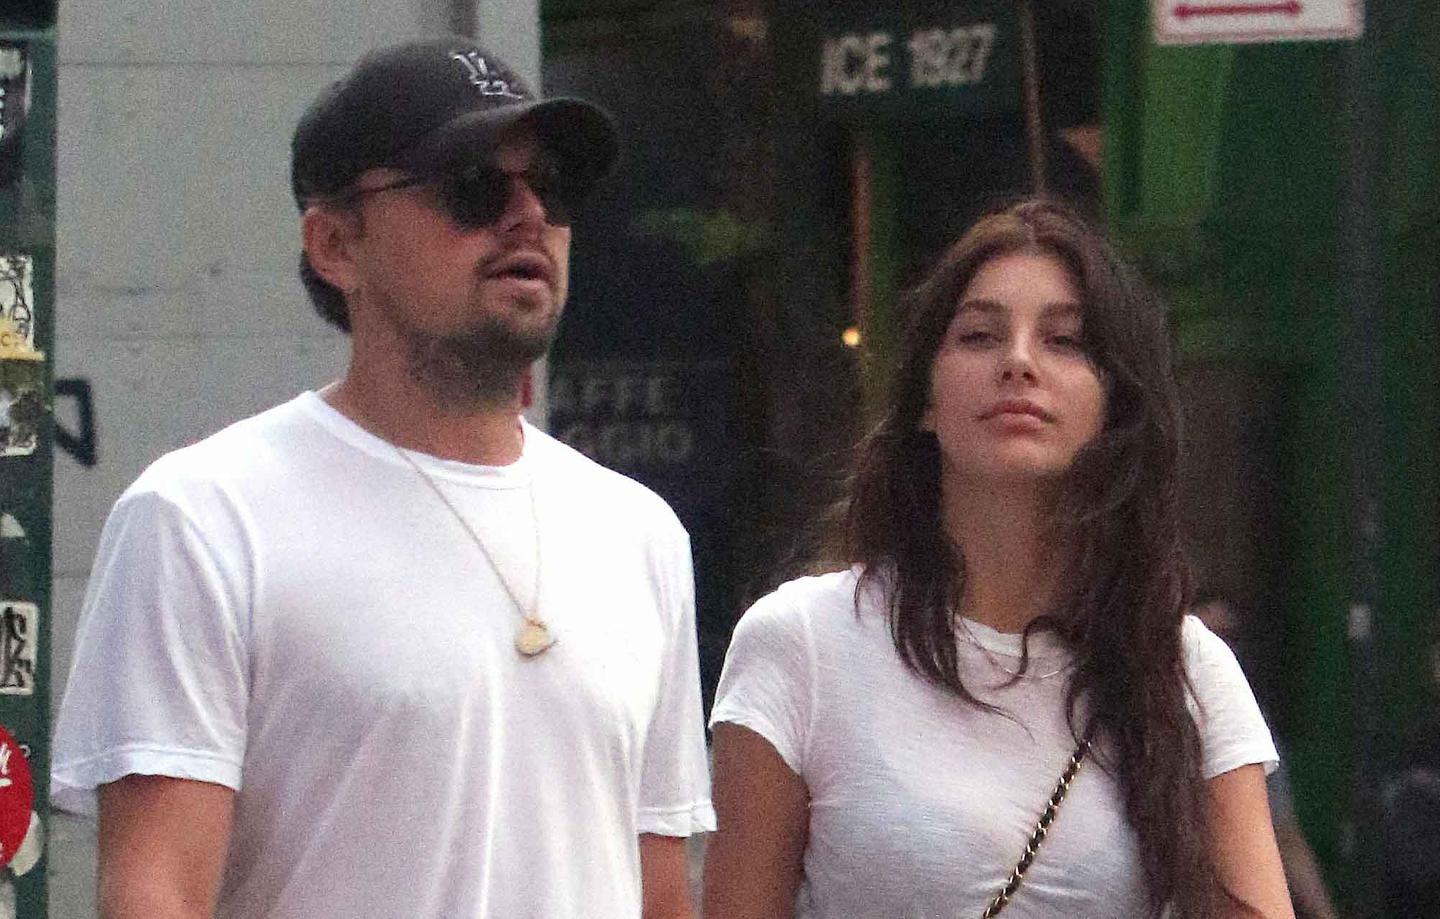 Leonardo DiCaprio Parties At NYC Days After Breakup With 25-Year-Old ...